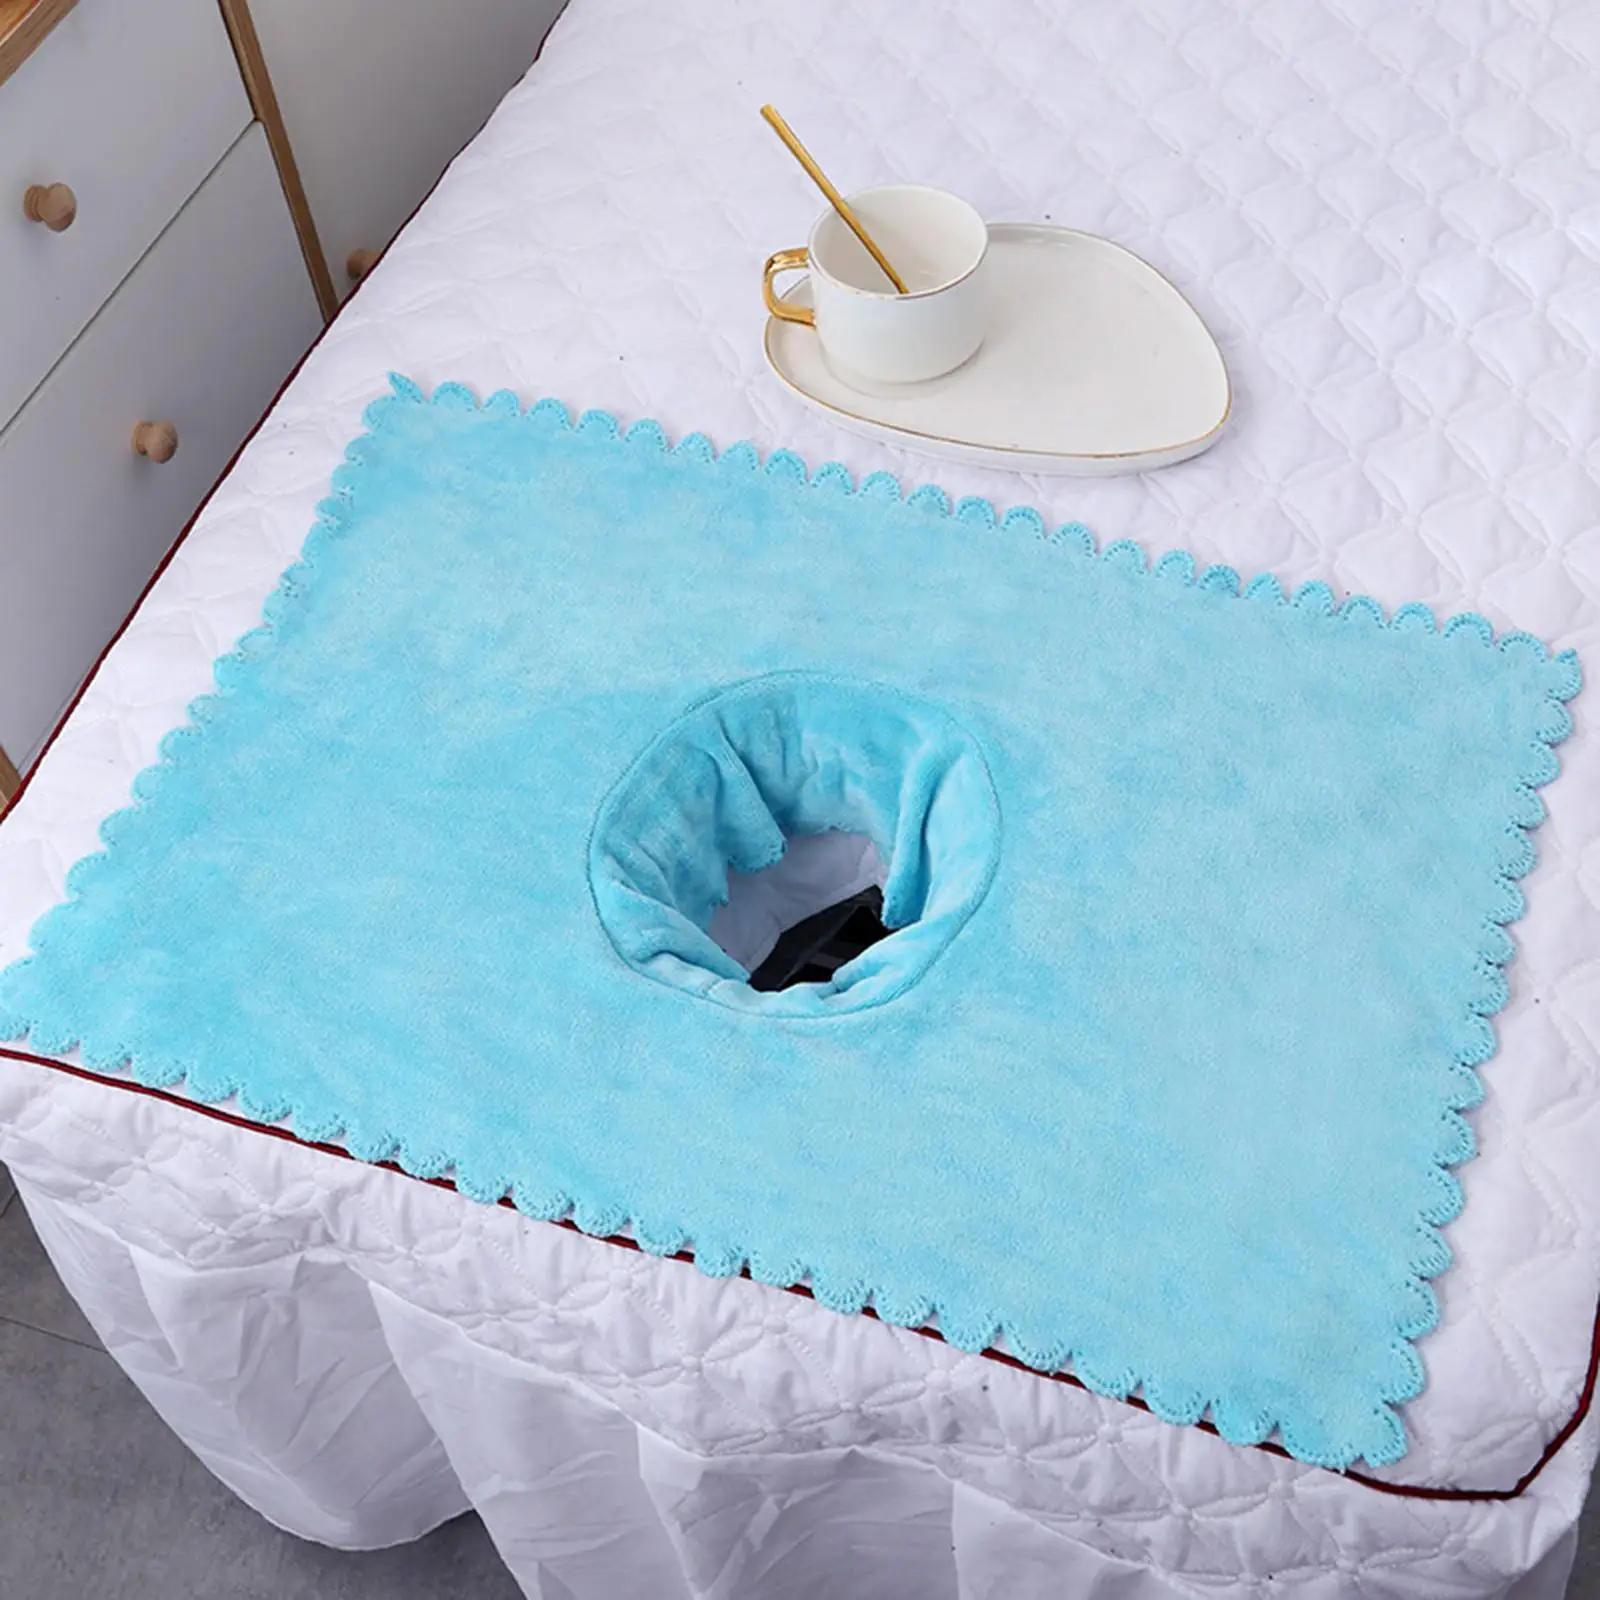 Massage Table Sheet Covers with Face Hole Skin Care Reusable for Massage Bed